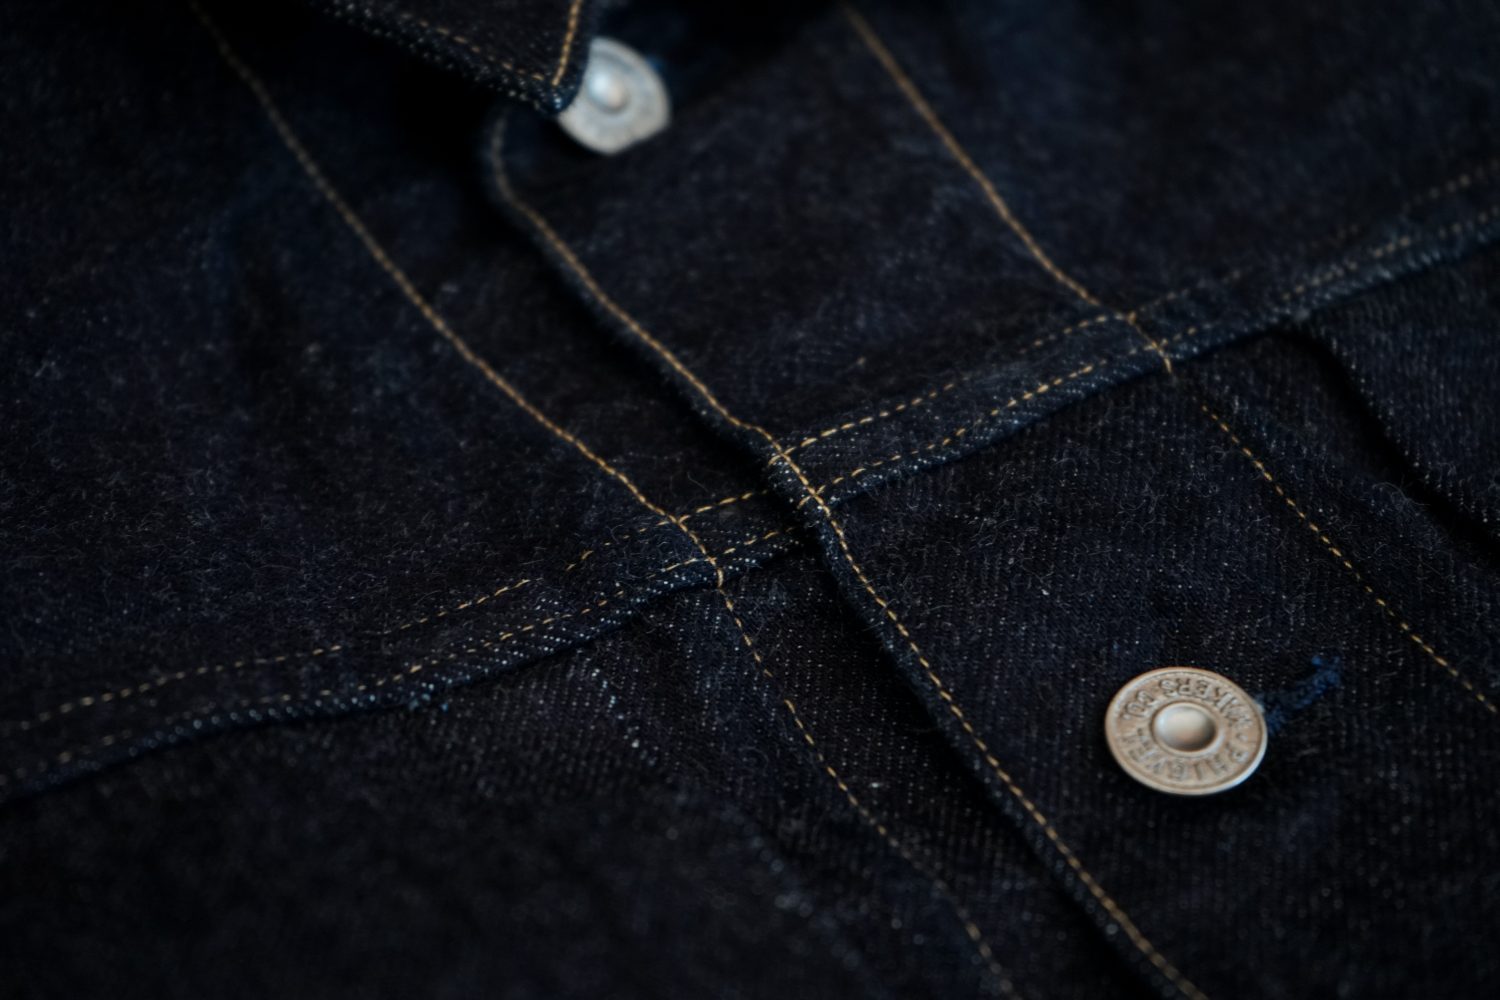 Permanent Products “Classic Jeans Series”